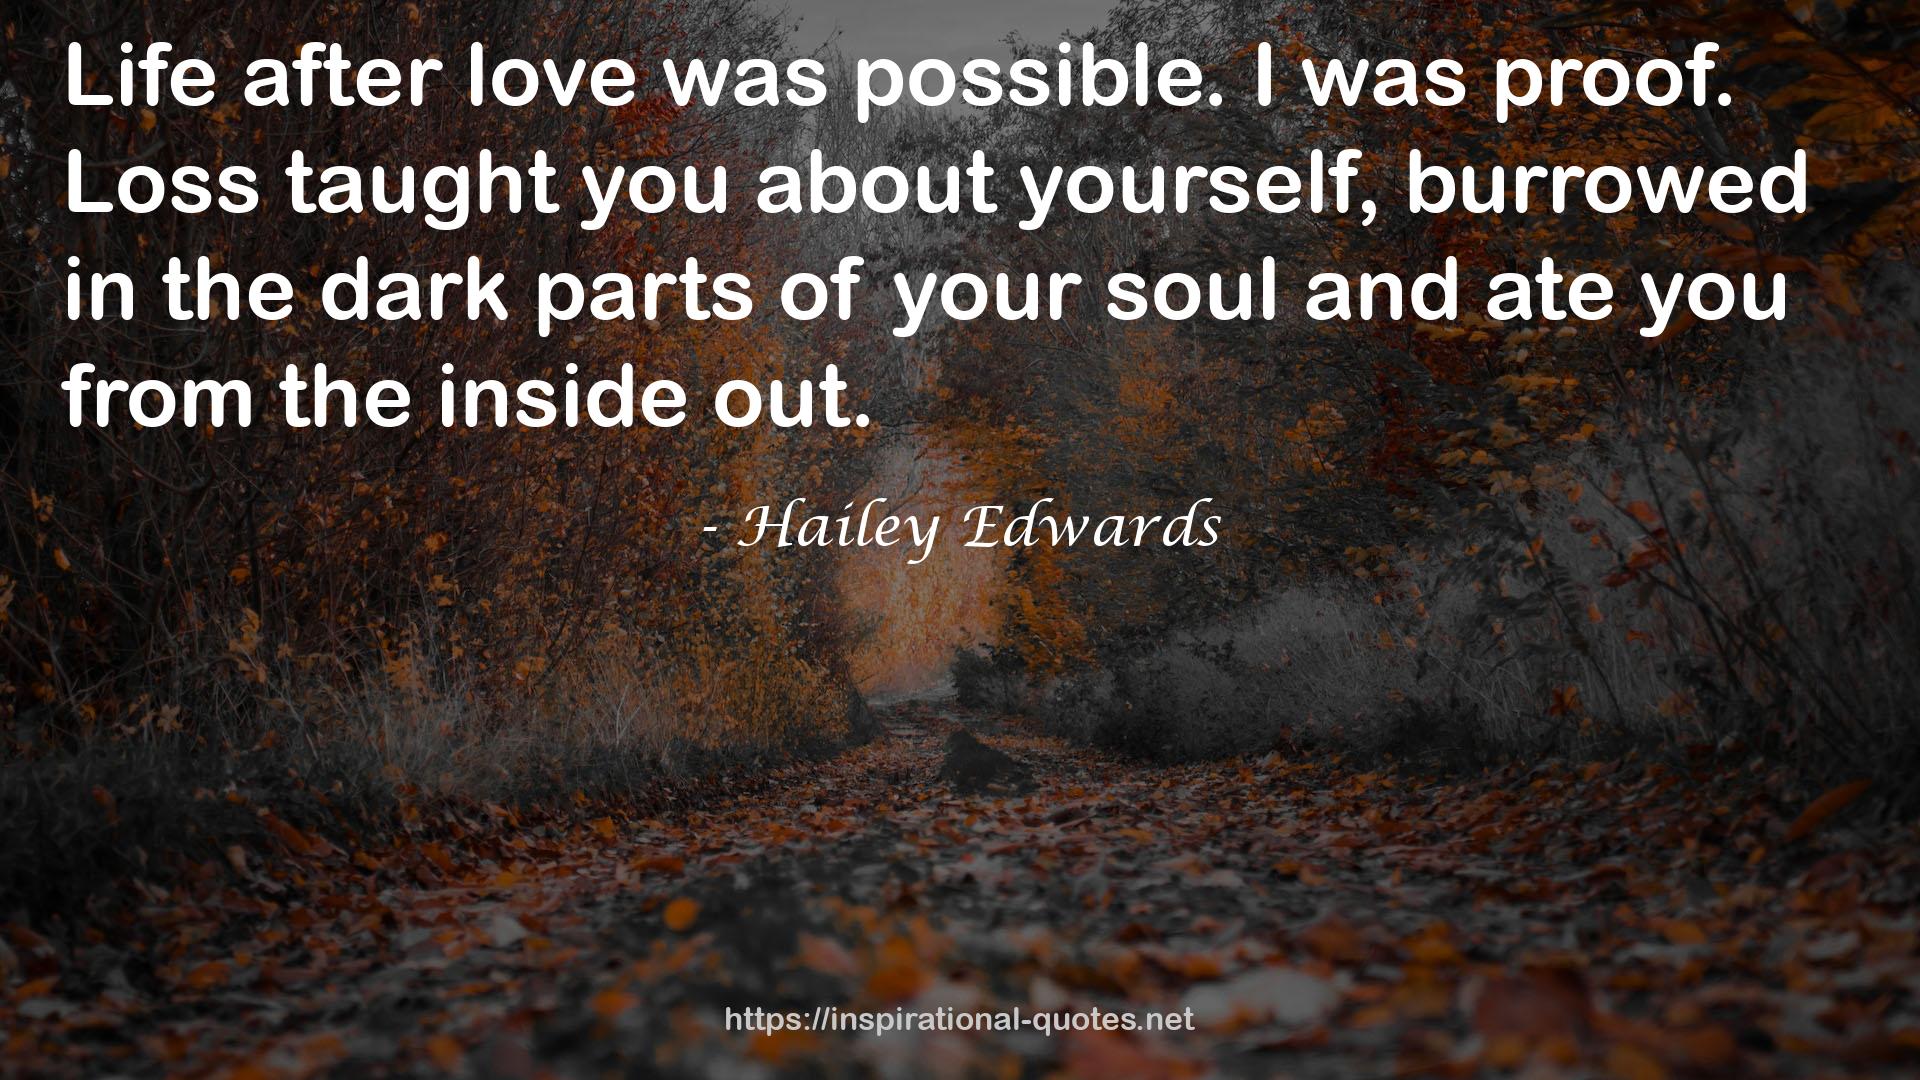 Hailey Edwards QUOTES